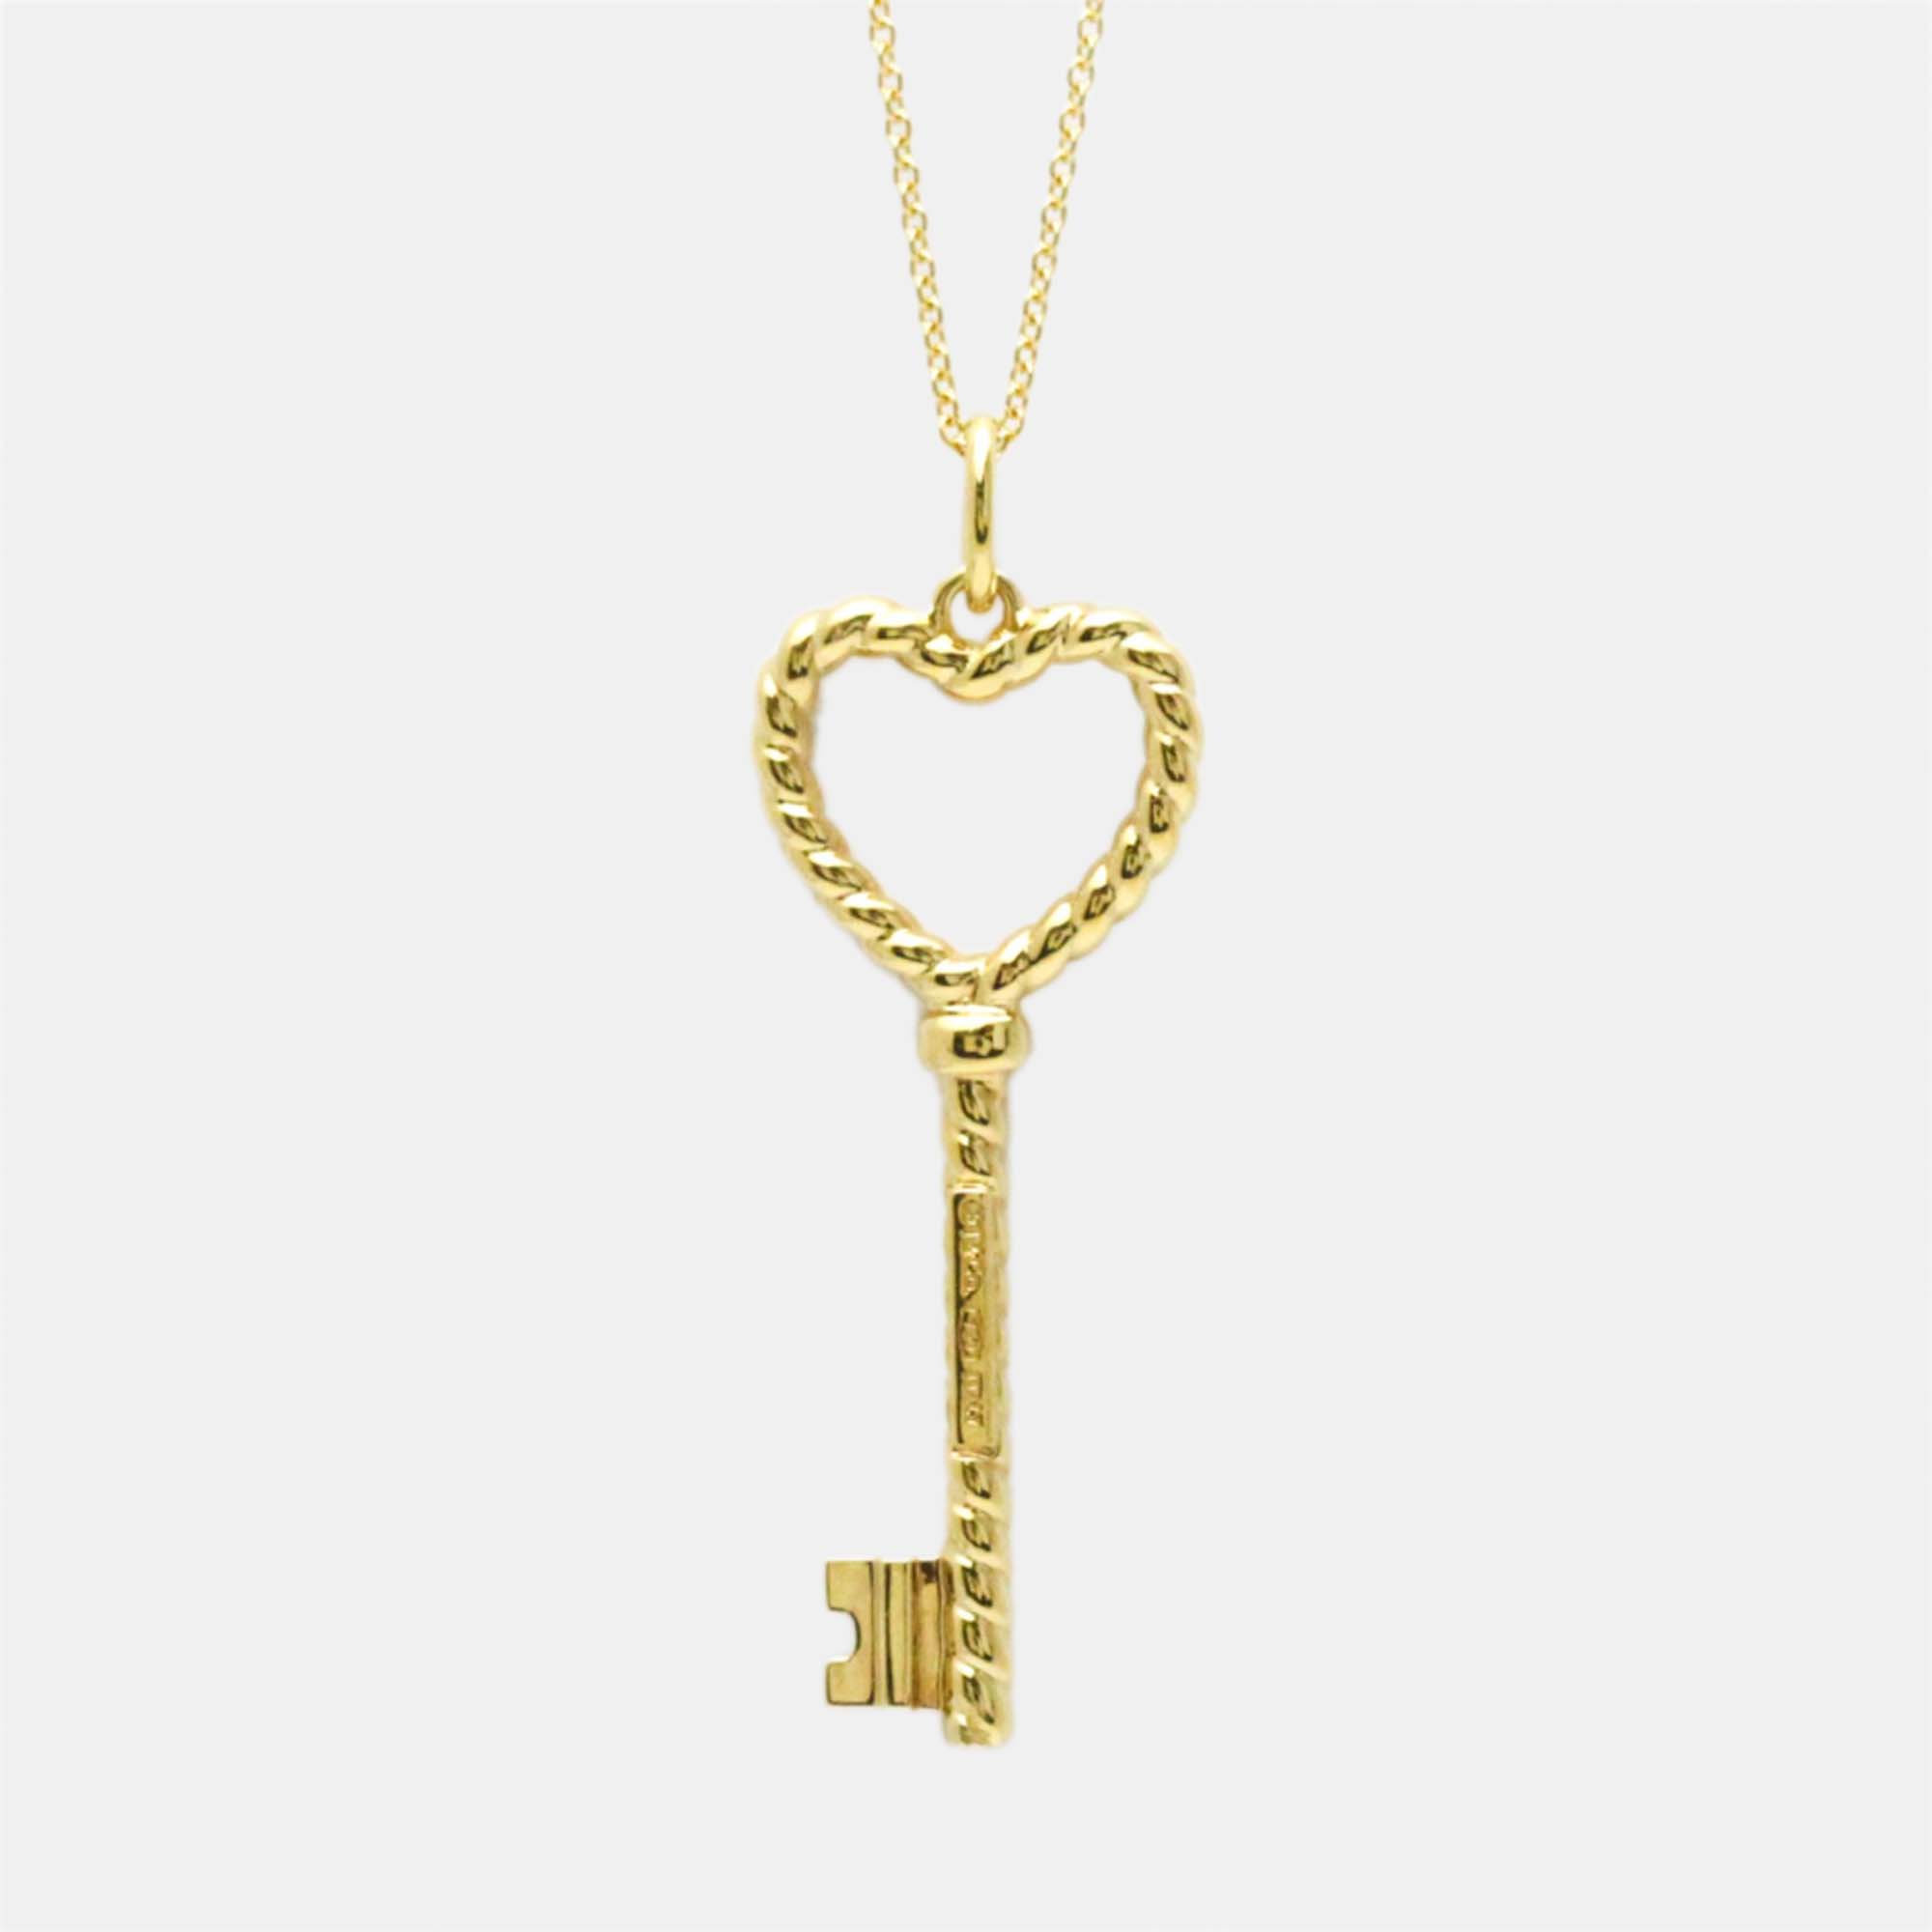 Tiffany & co. twisted heart key 18k yellow gold necklace